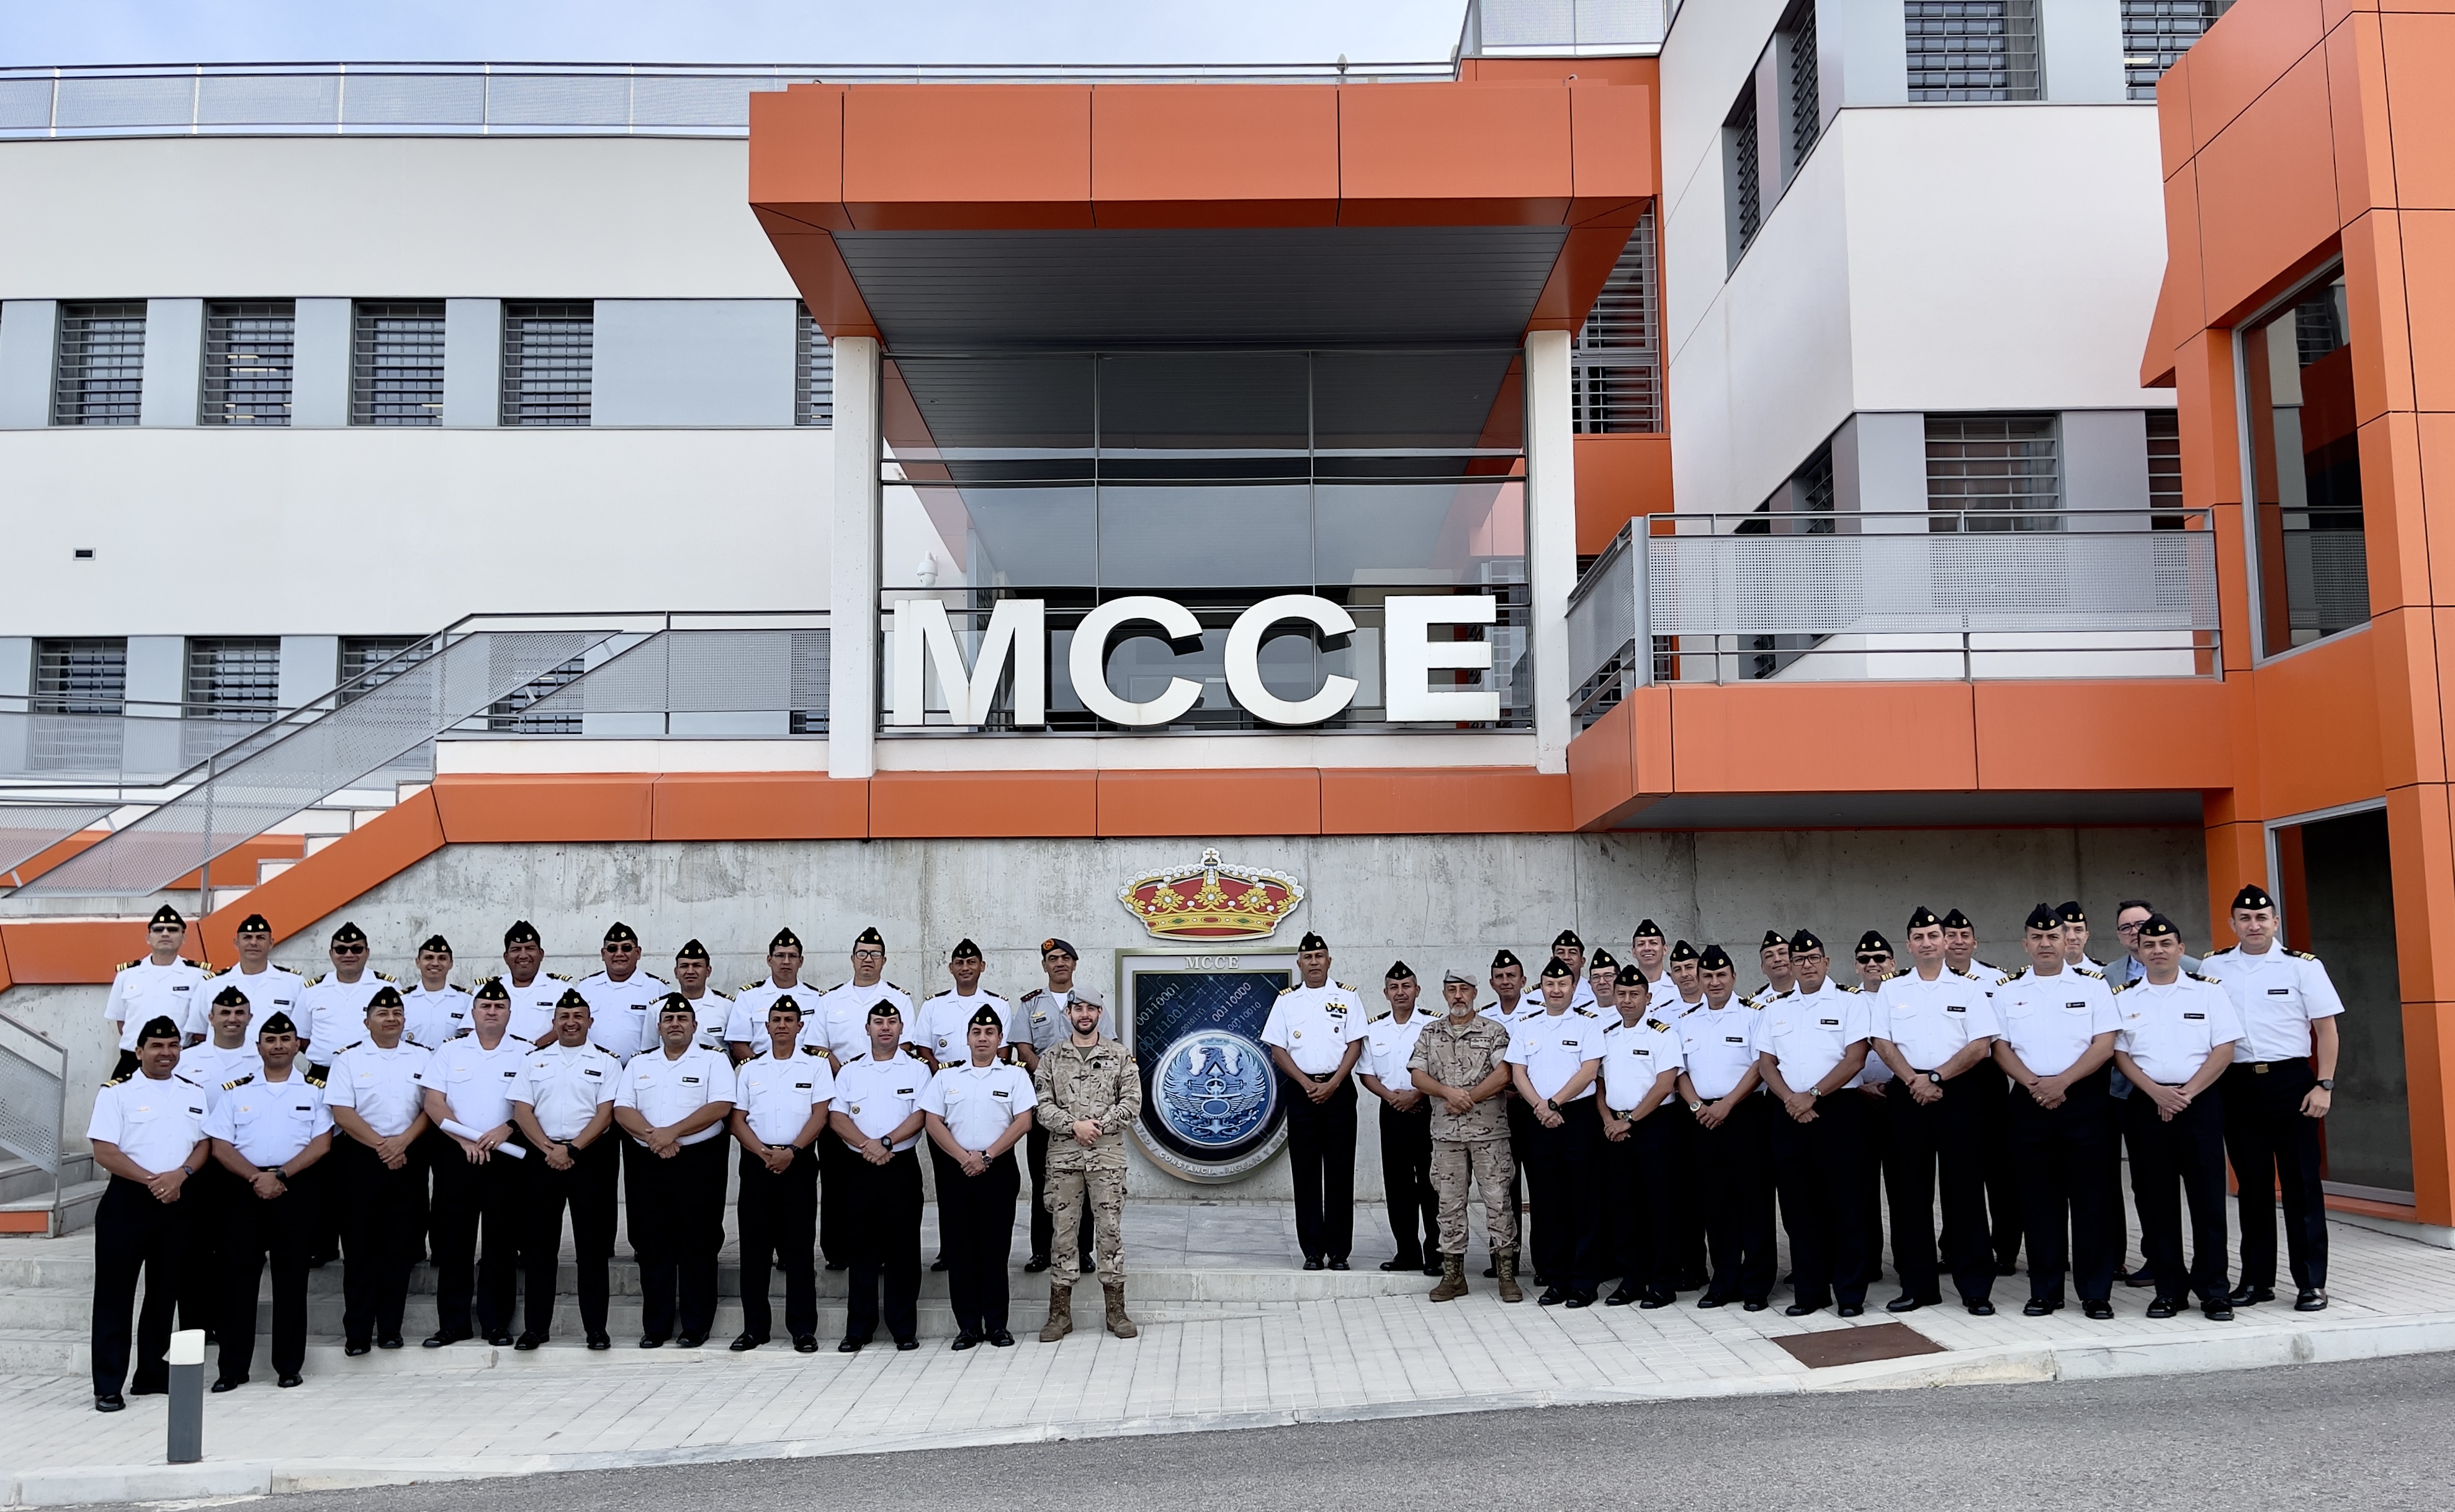 Group photo in front of the MCCE building